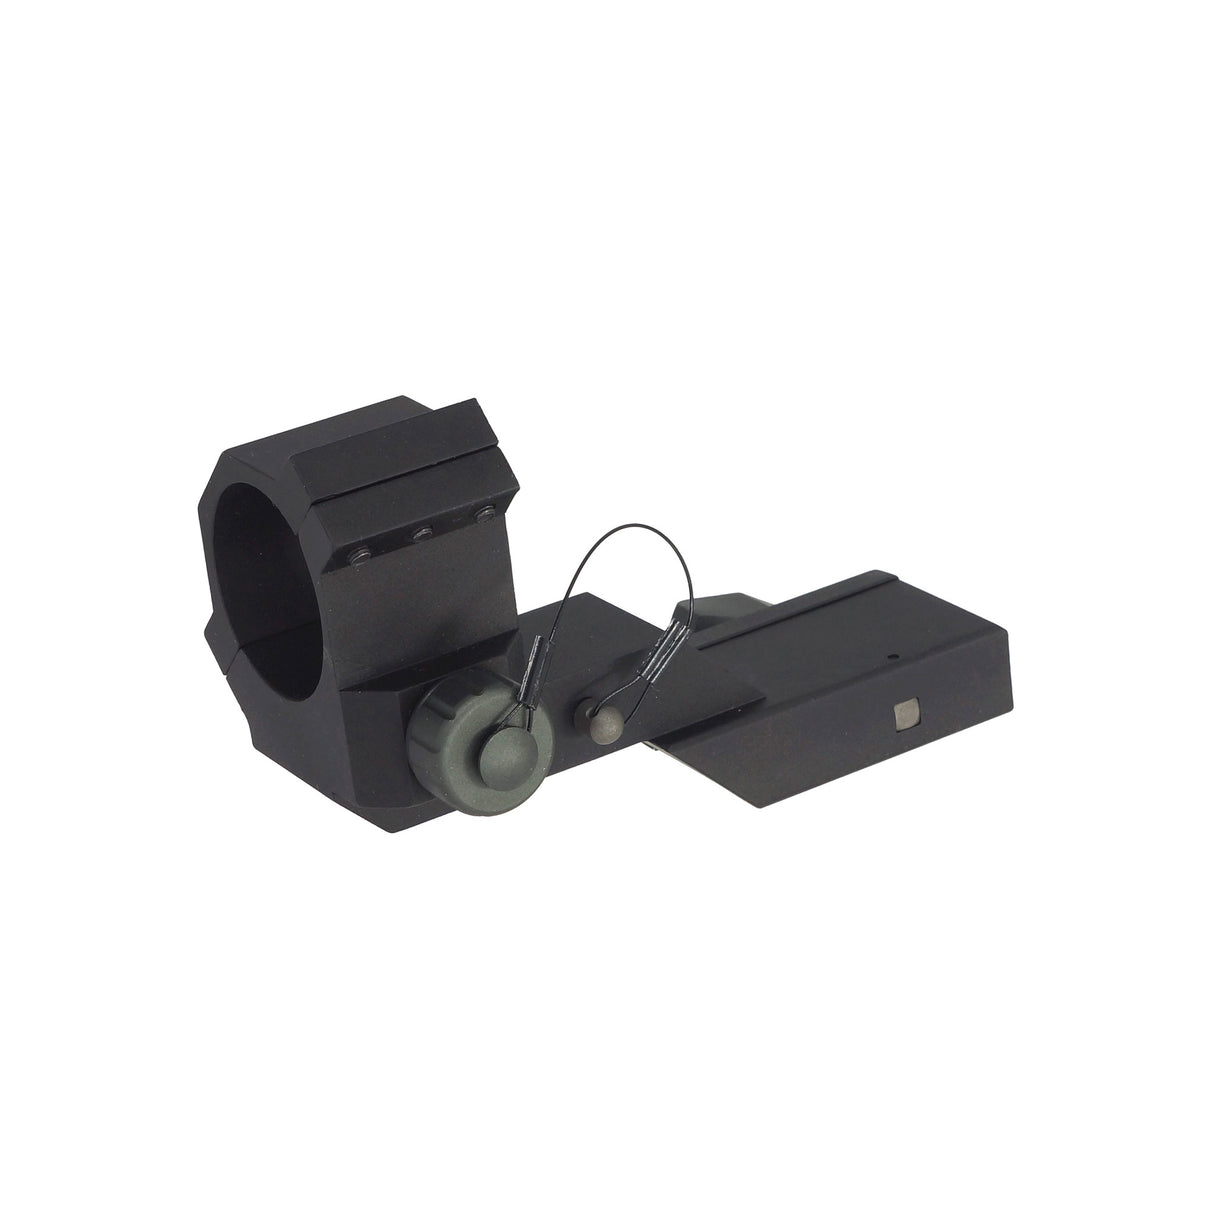 G&P Military Z Type Red Dot Sight Mount for 20mm Rail ( GP524 )